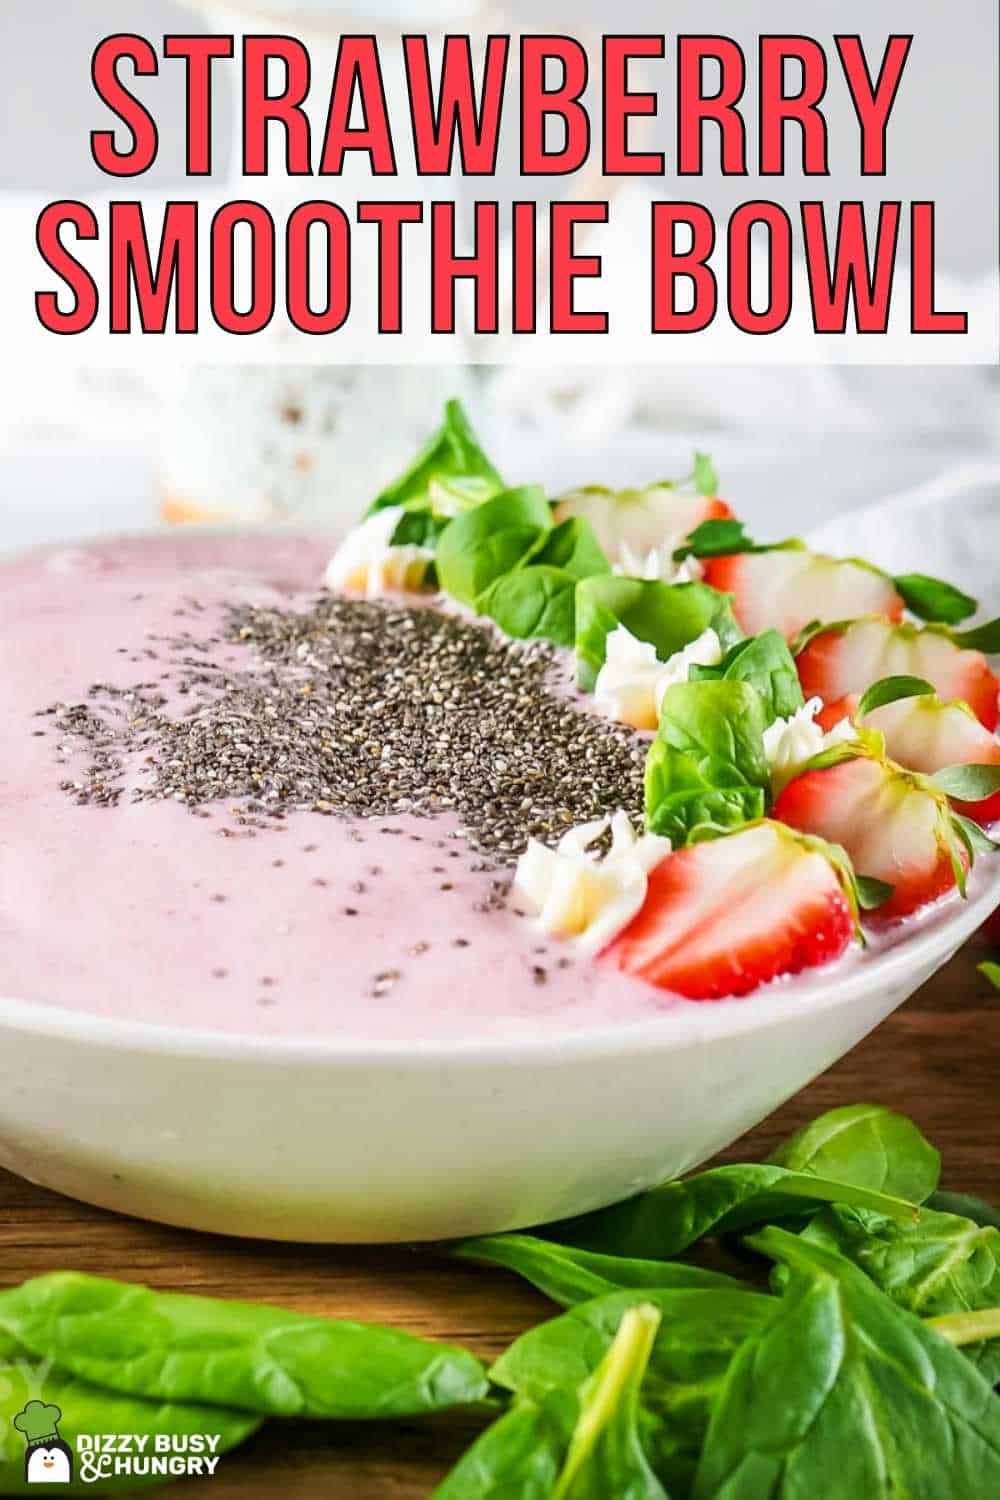 Side view of smoothie bowl garnished with flax seeds, mint, and sliced strawberries on a wooden surface with more mint on the side.